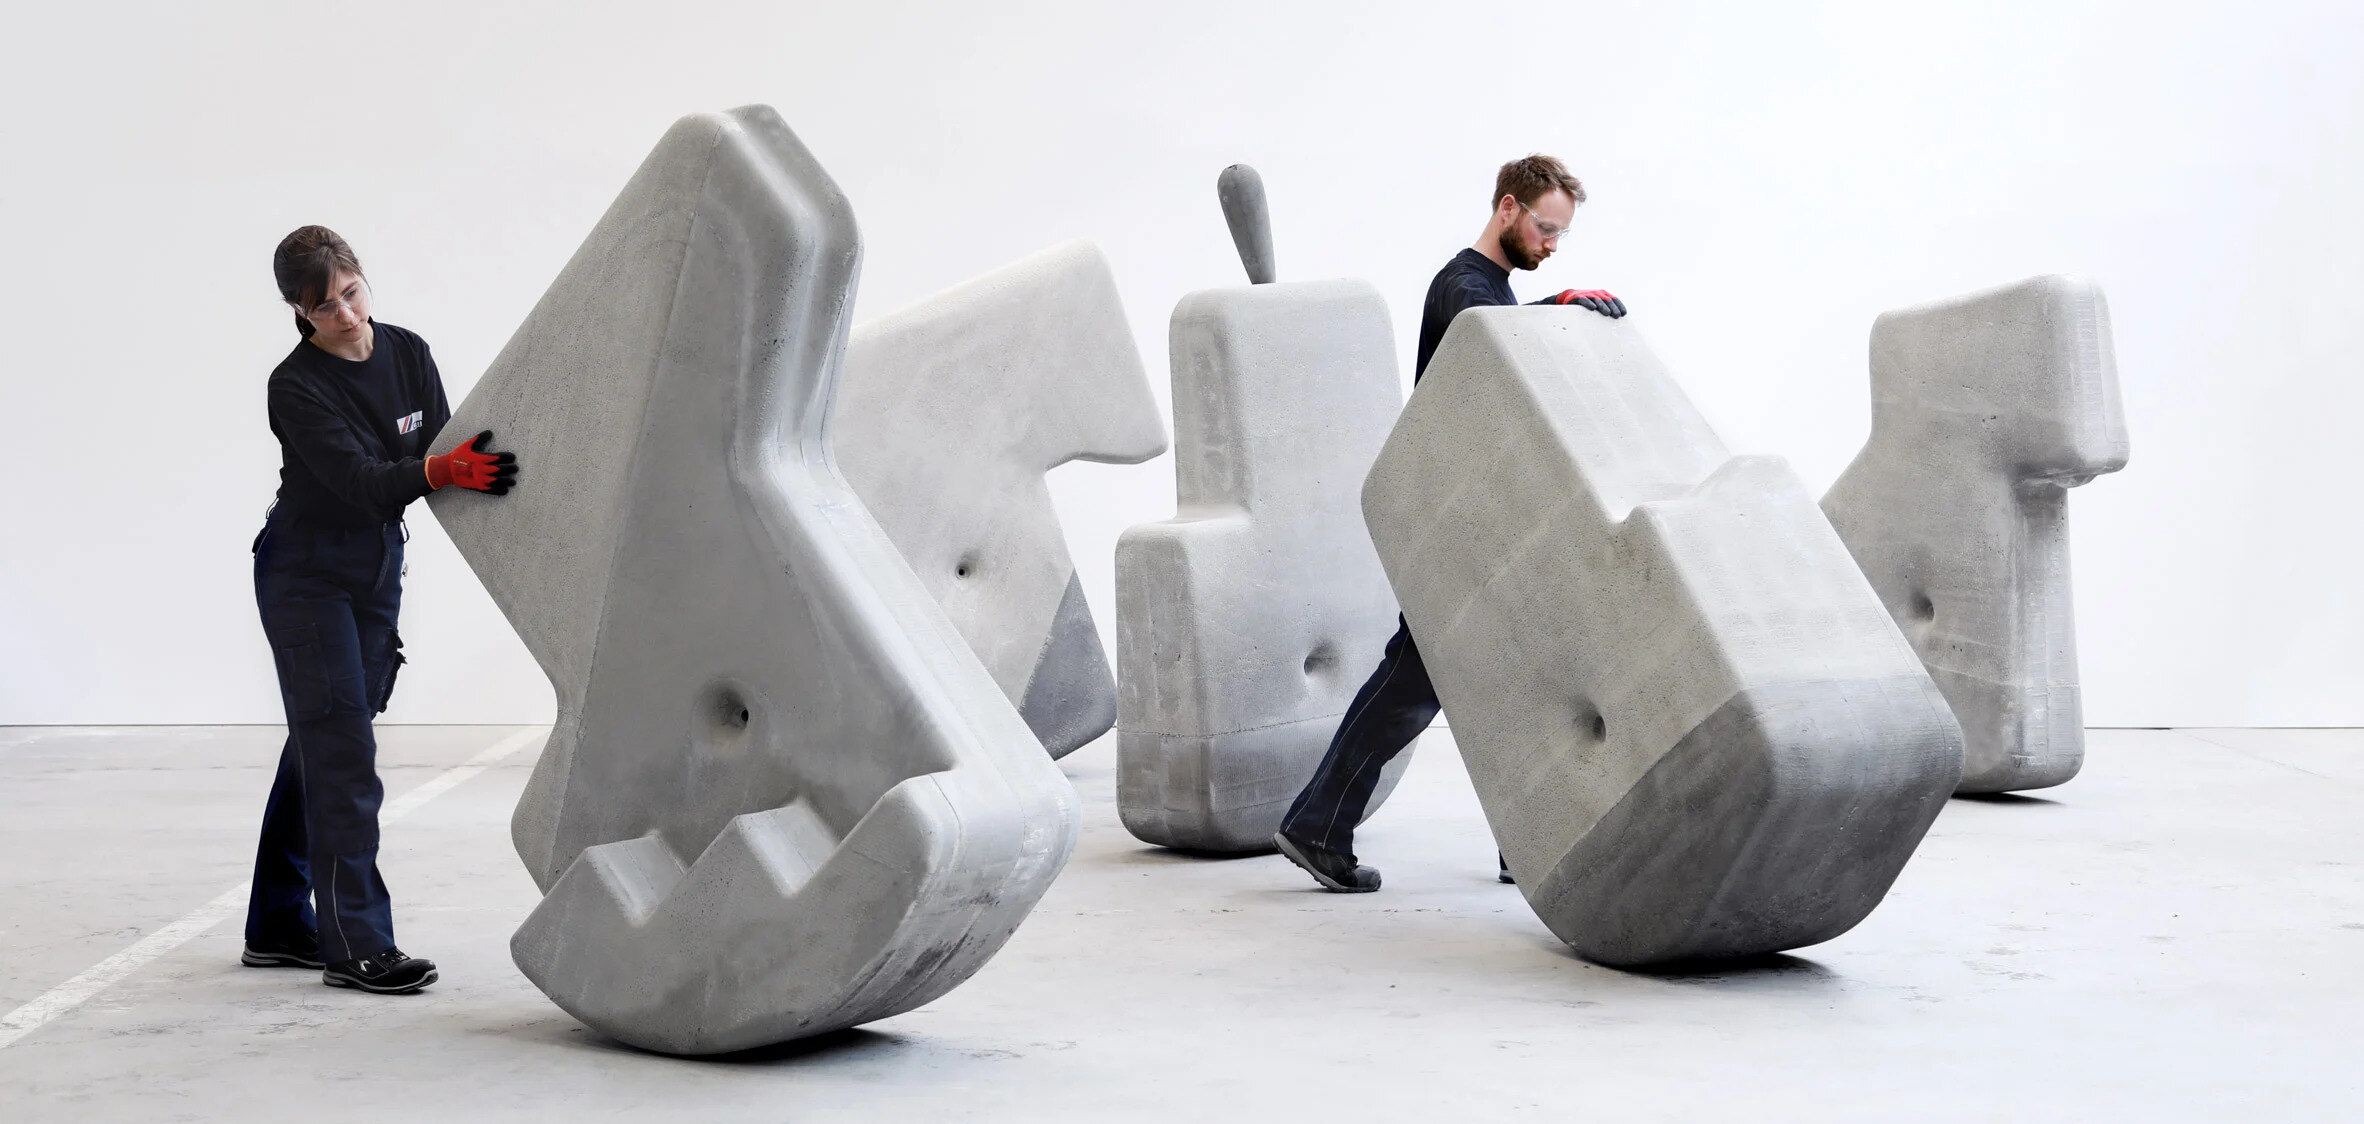 How To Make A Cement Sculpture